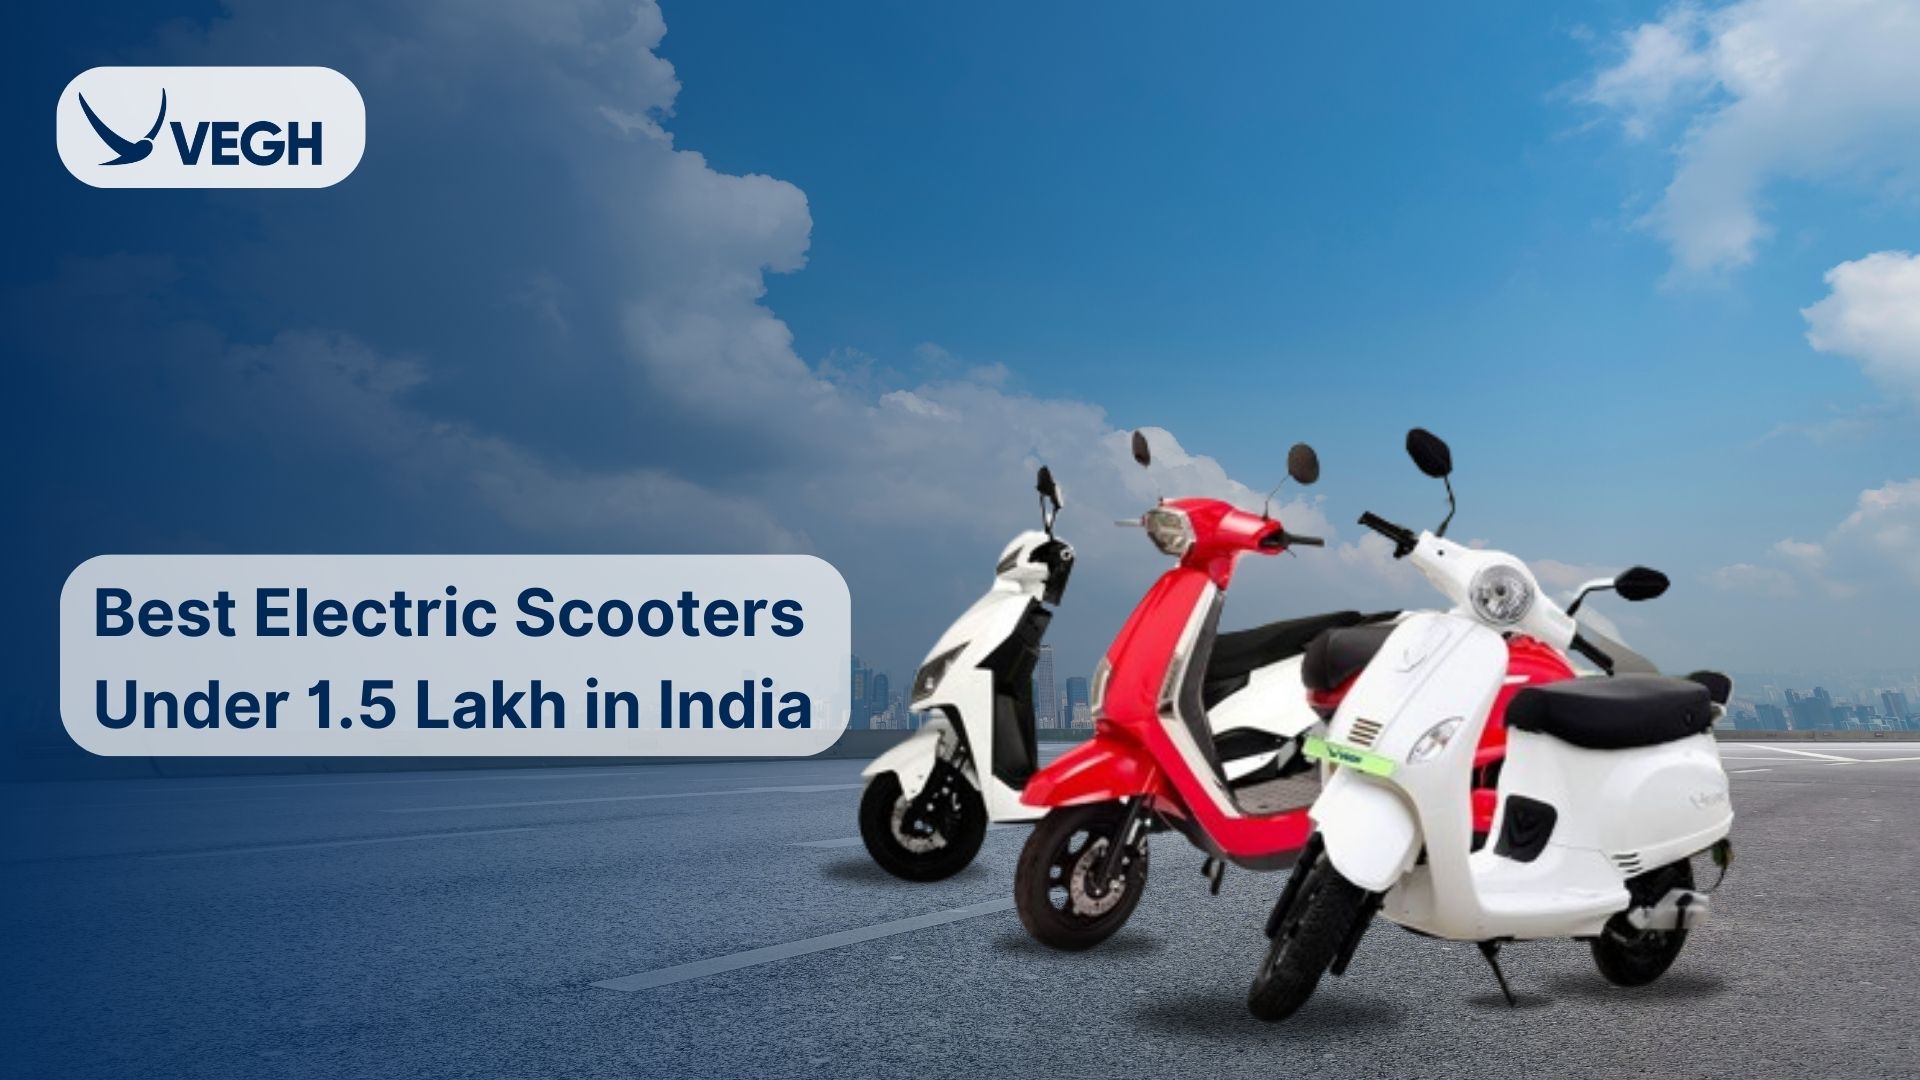 Best Electric scooters Under 1.5 Lakh in India